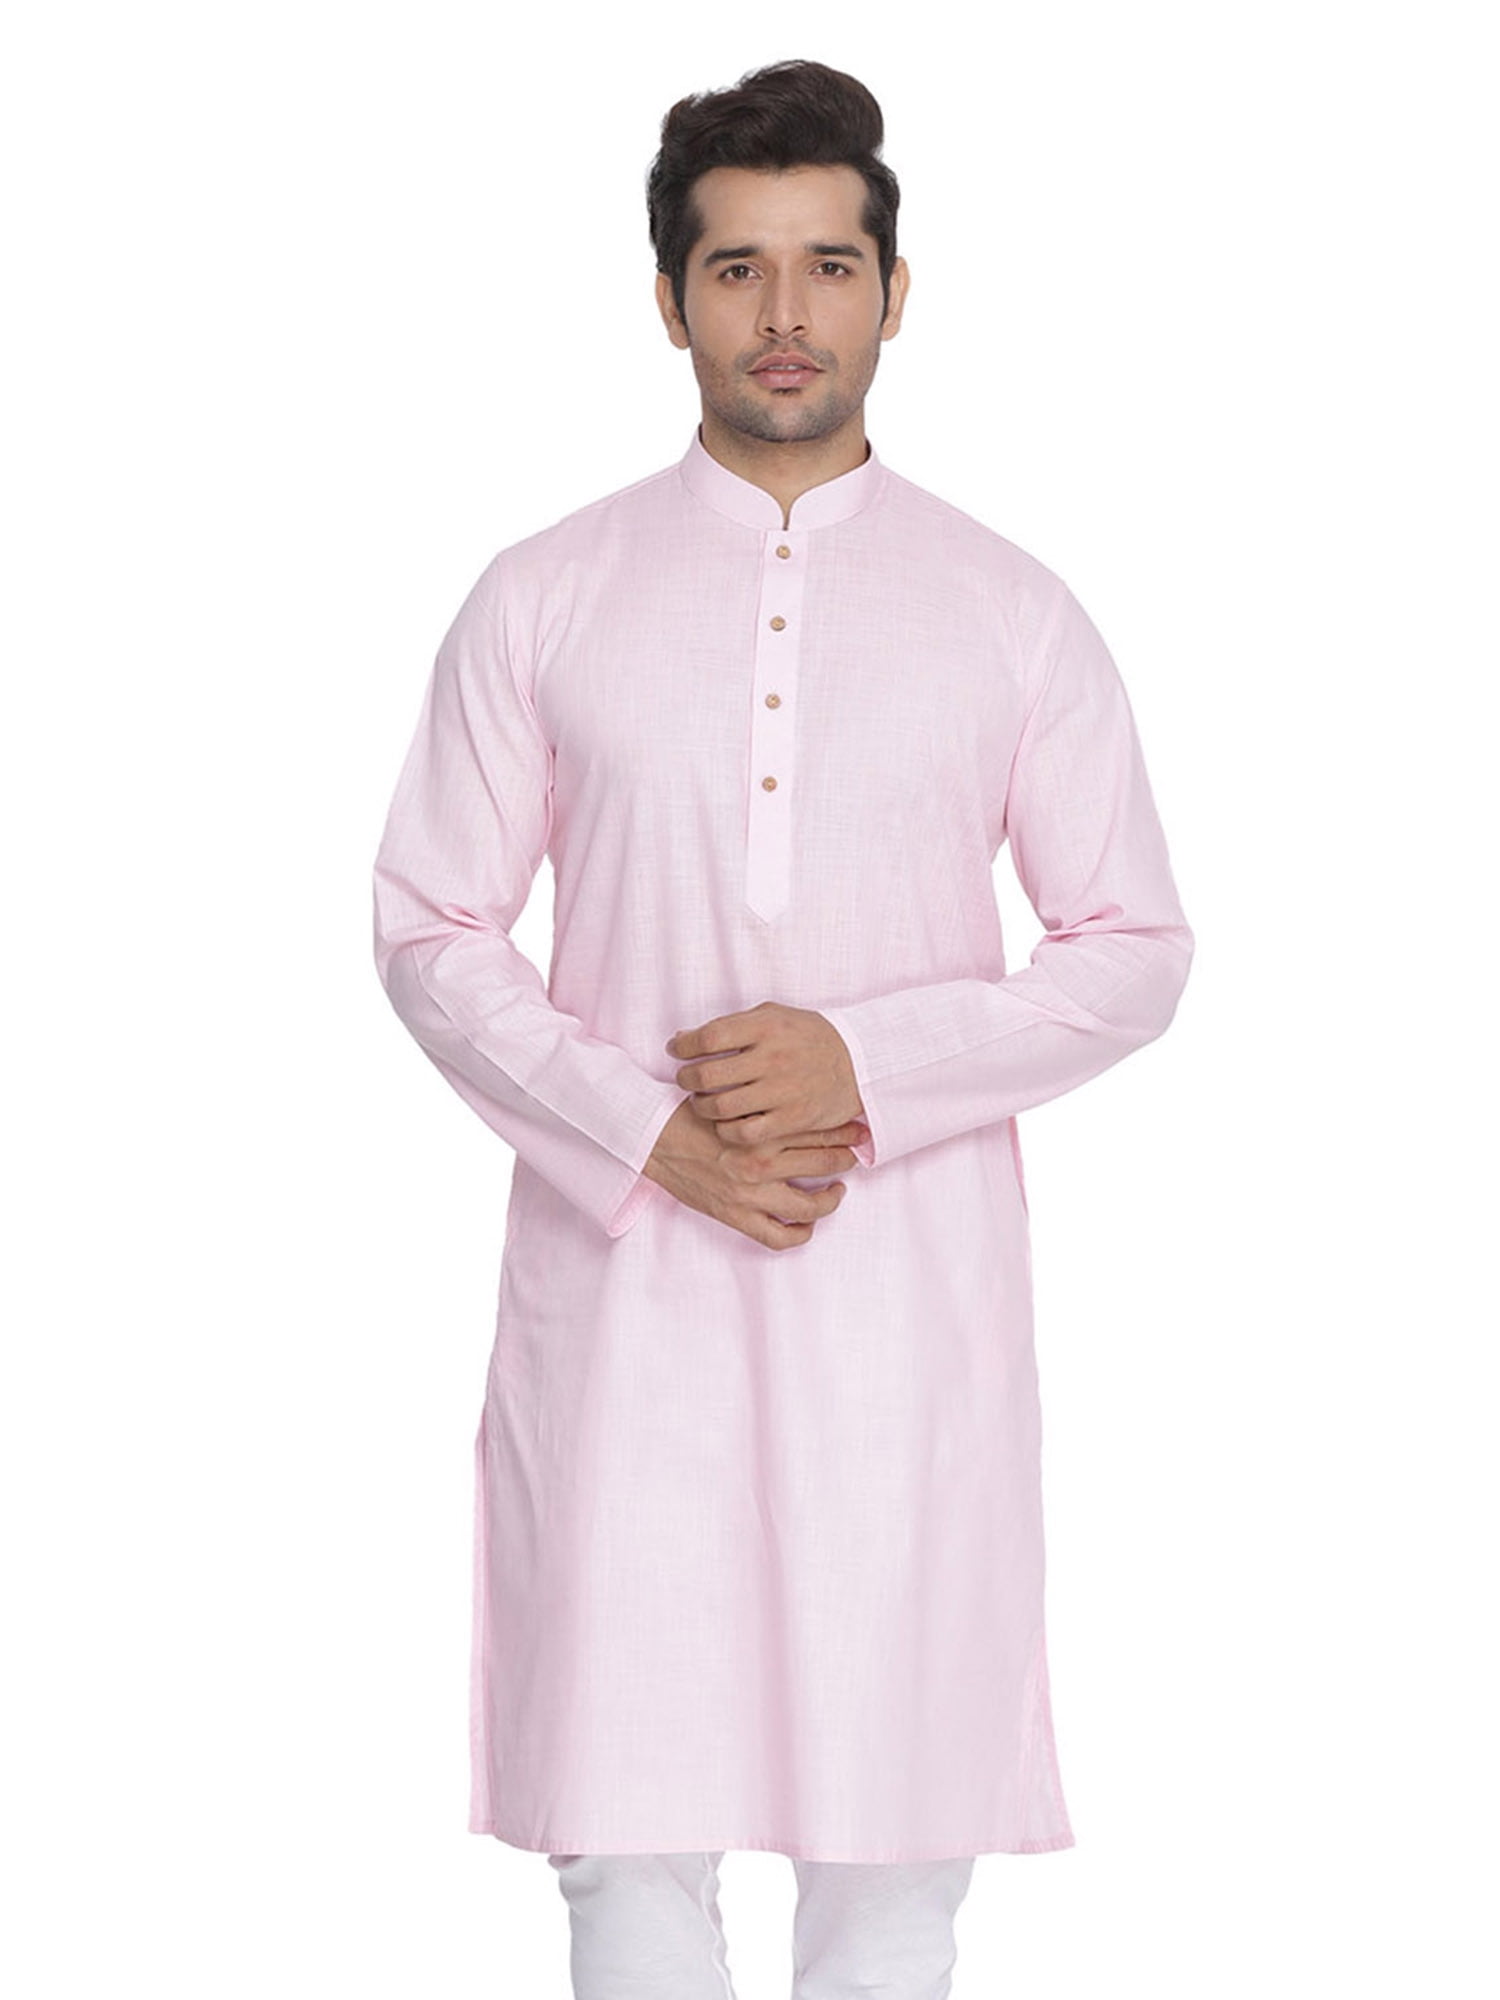 Details about   Men Kurta Suit Pajama Long Sleeve Casual Button Ethnic Fastive And Party 